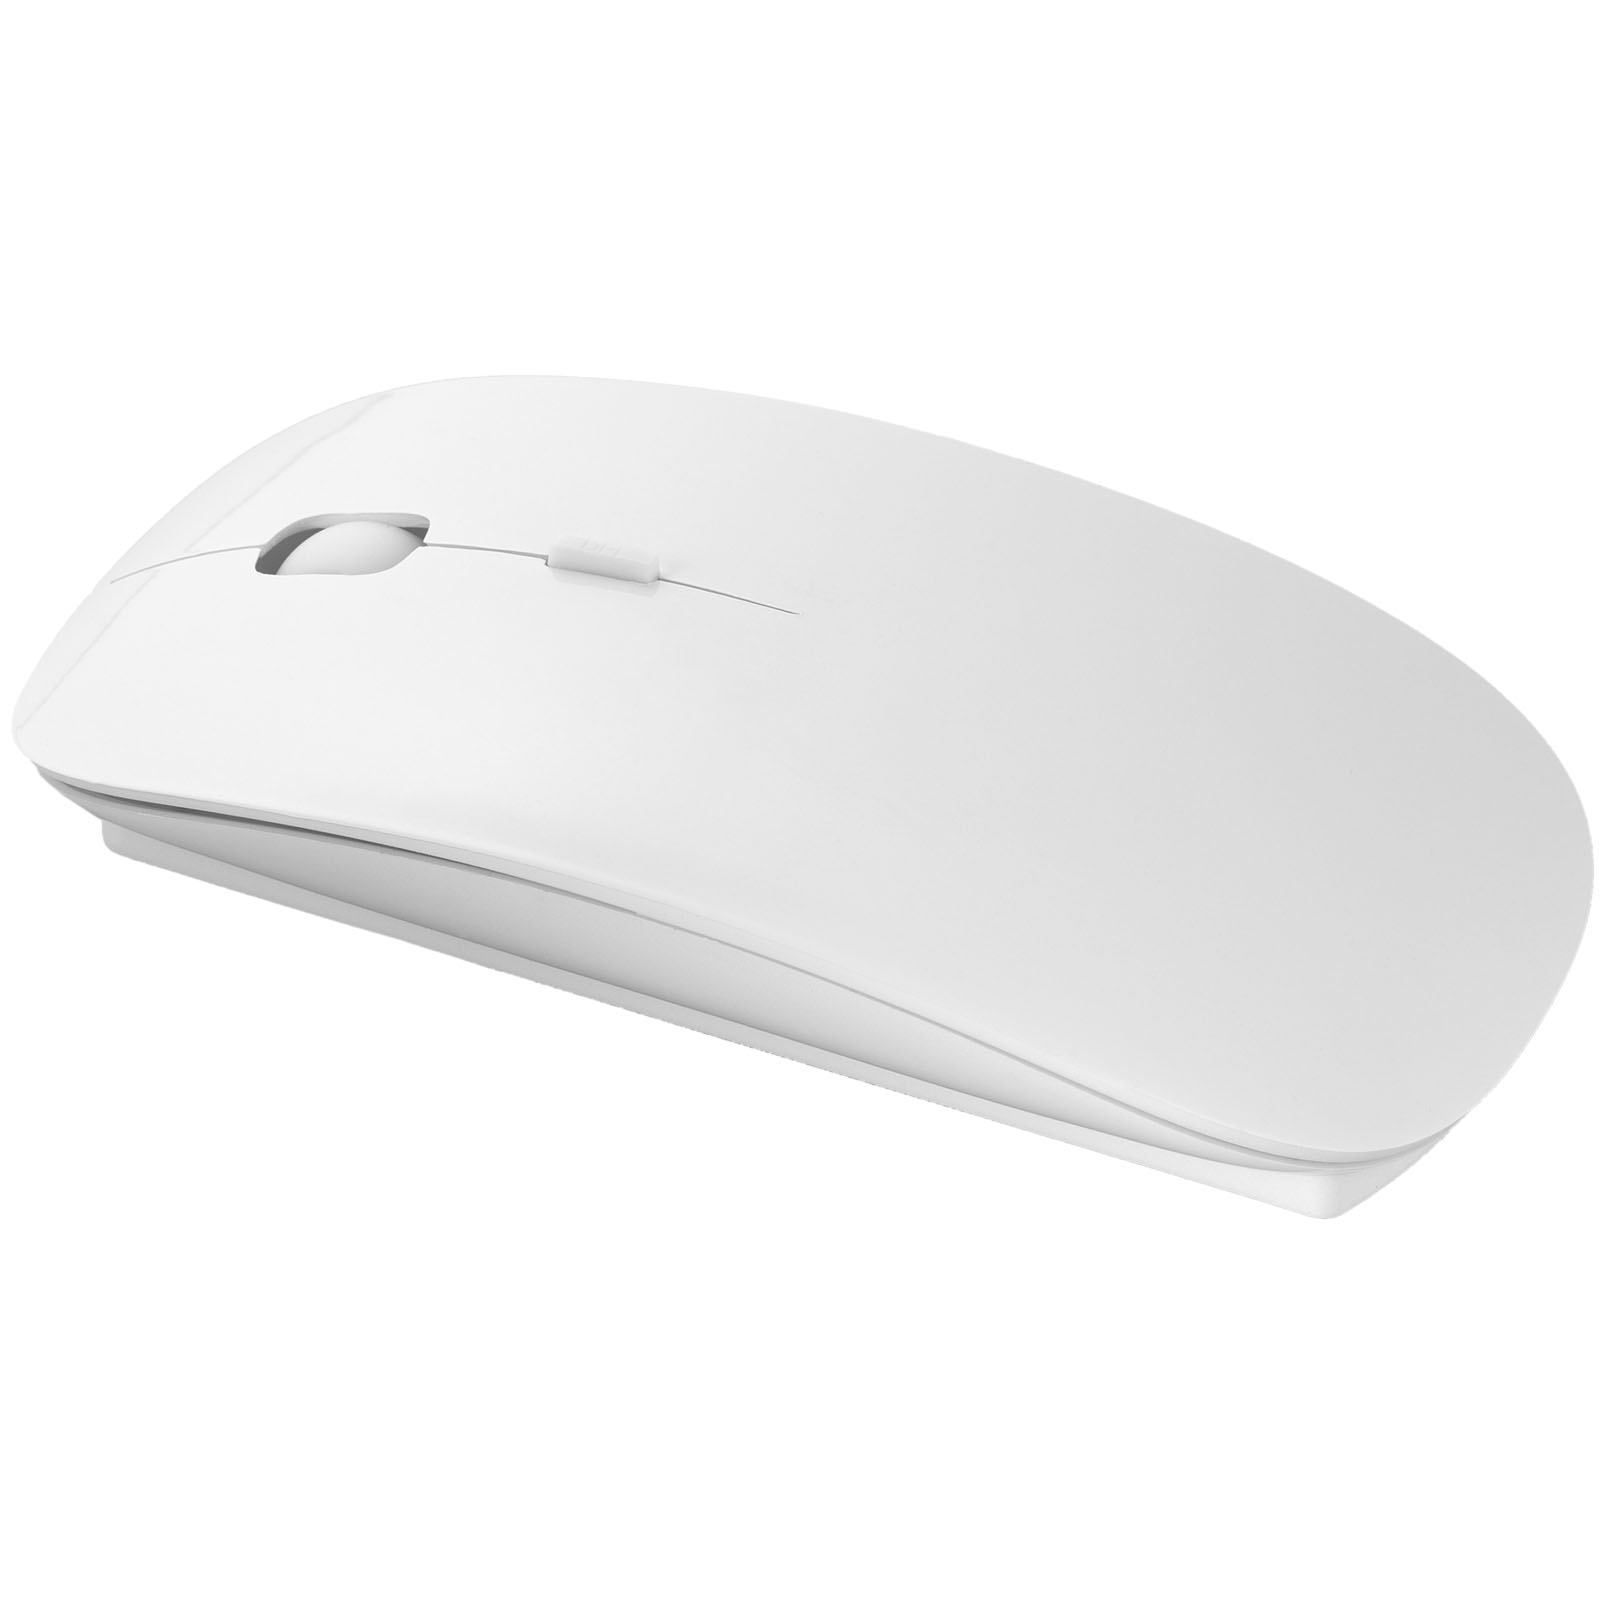 Advertising Computer Accessories - Menlo wireless mouse